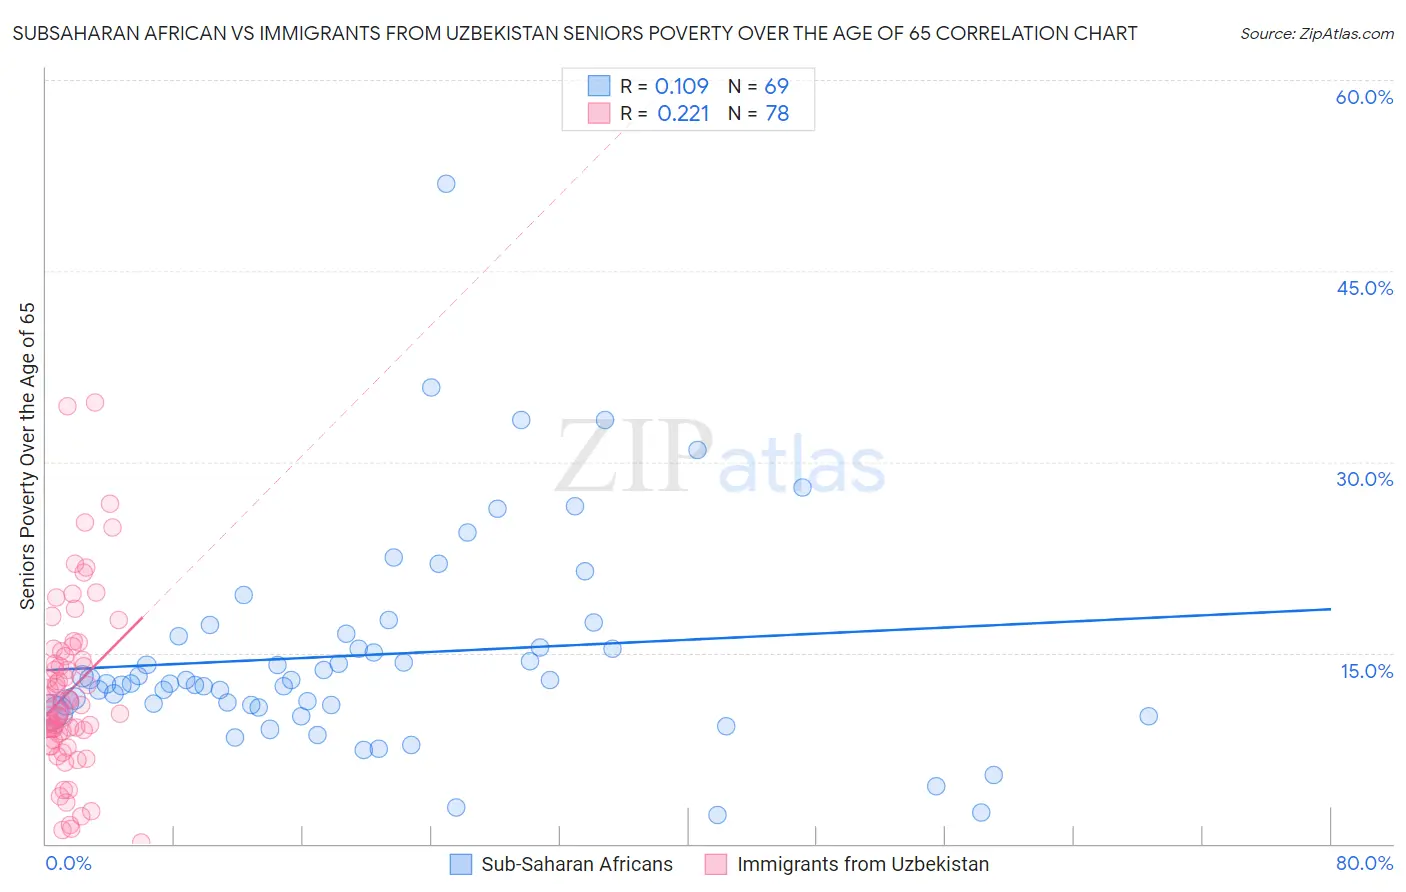 Subsaharan African vs Immigrants from Uzbekistan Seniors Poverty Over the Age of 65